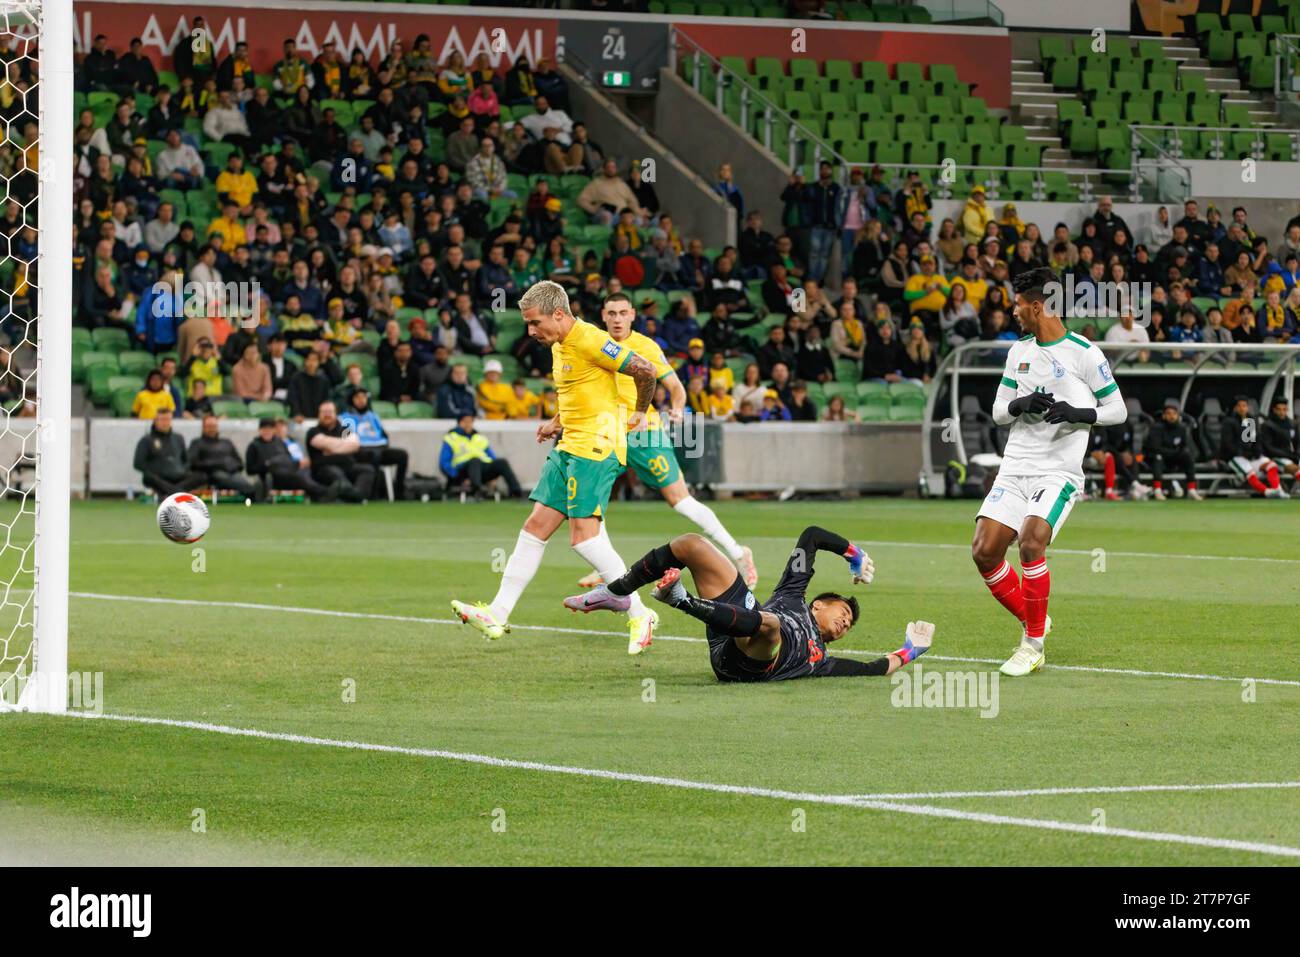 Jamie Maclaren of Australia scores a goal during the FIFA World Cup 2026 AFC Asian Qualifying game between Australia and Bangladesh. Australia won the game 7 : 0. Stock Photo